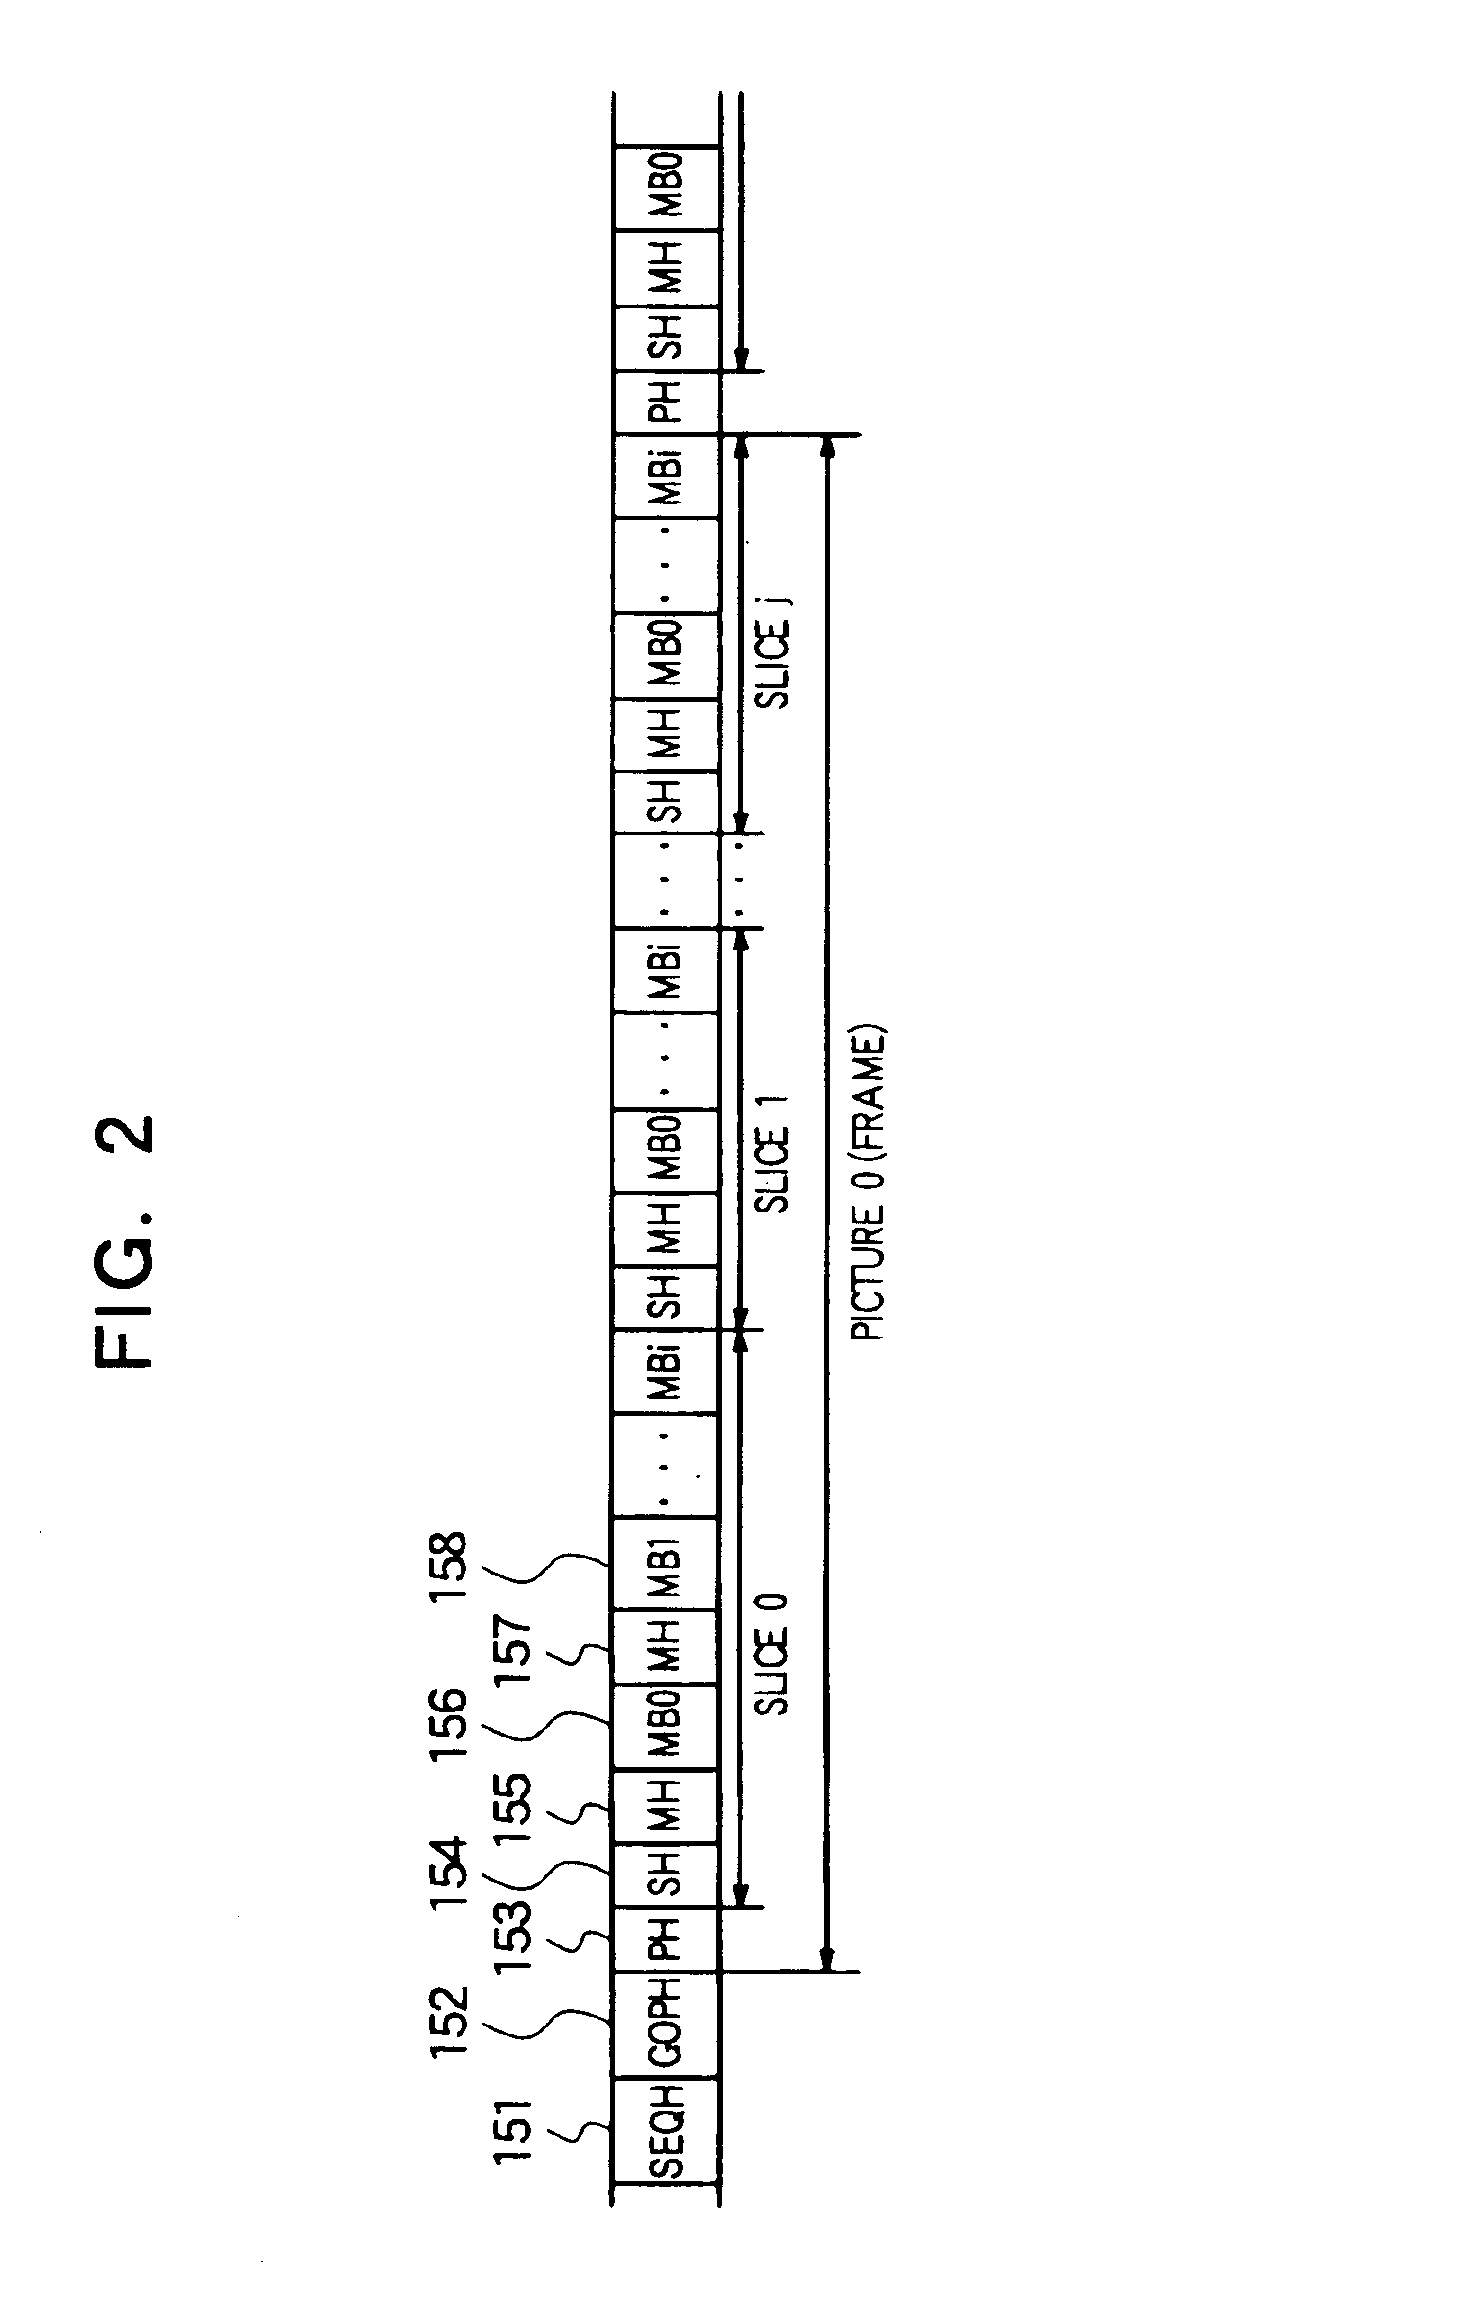 Parallel encoding and decoding processor system and method